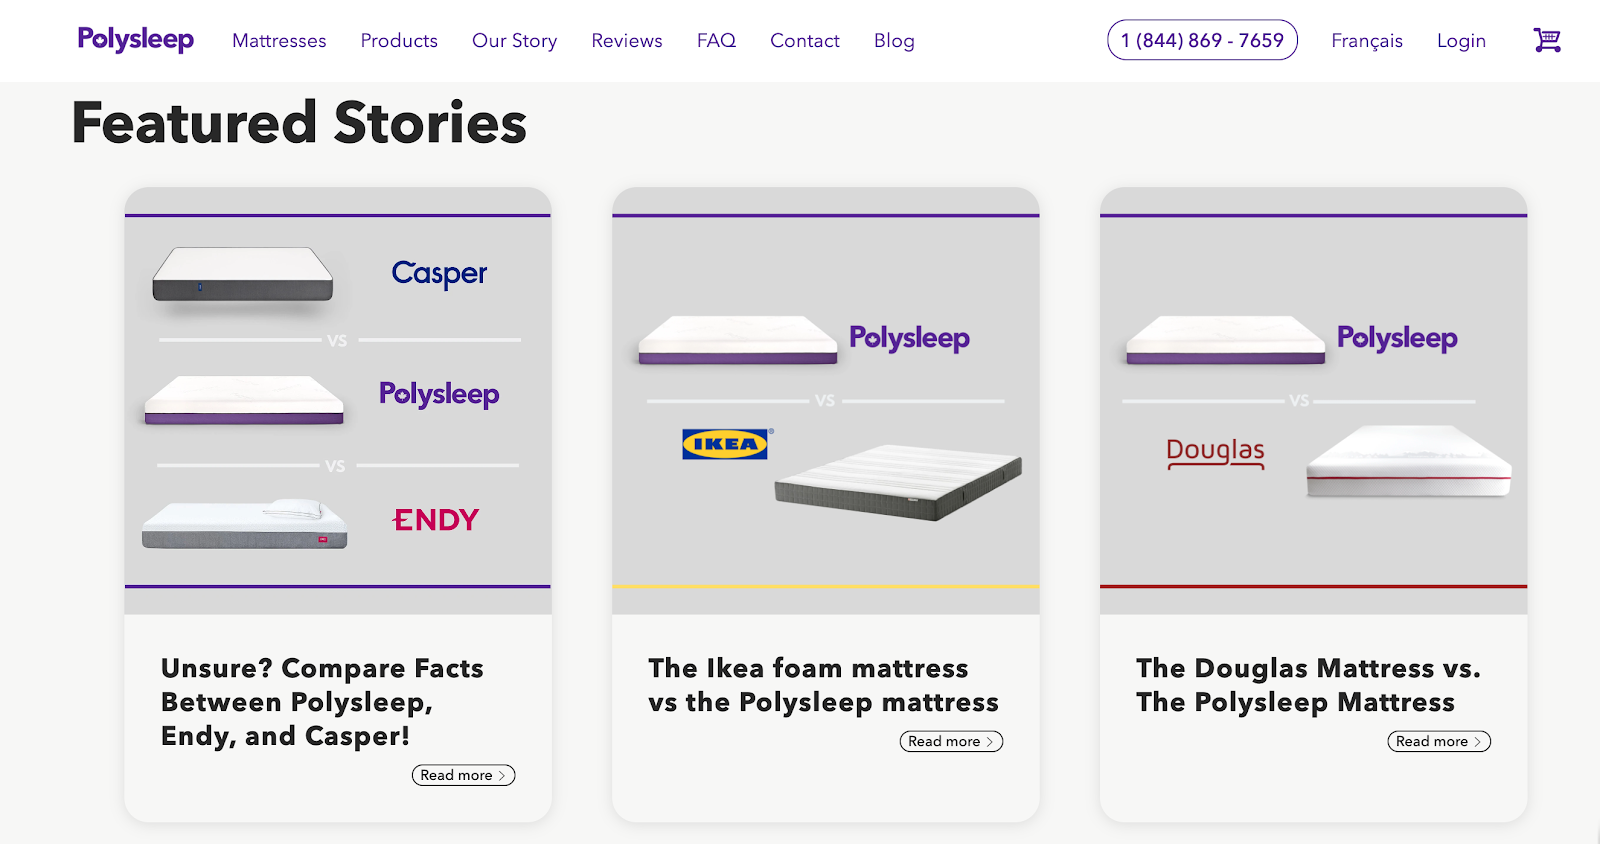 More product information on Polysleep and how it compares to its competitors